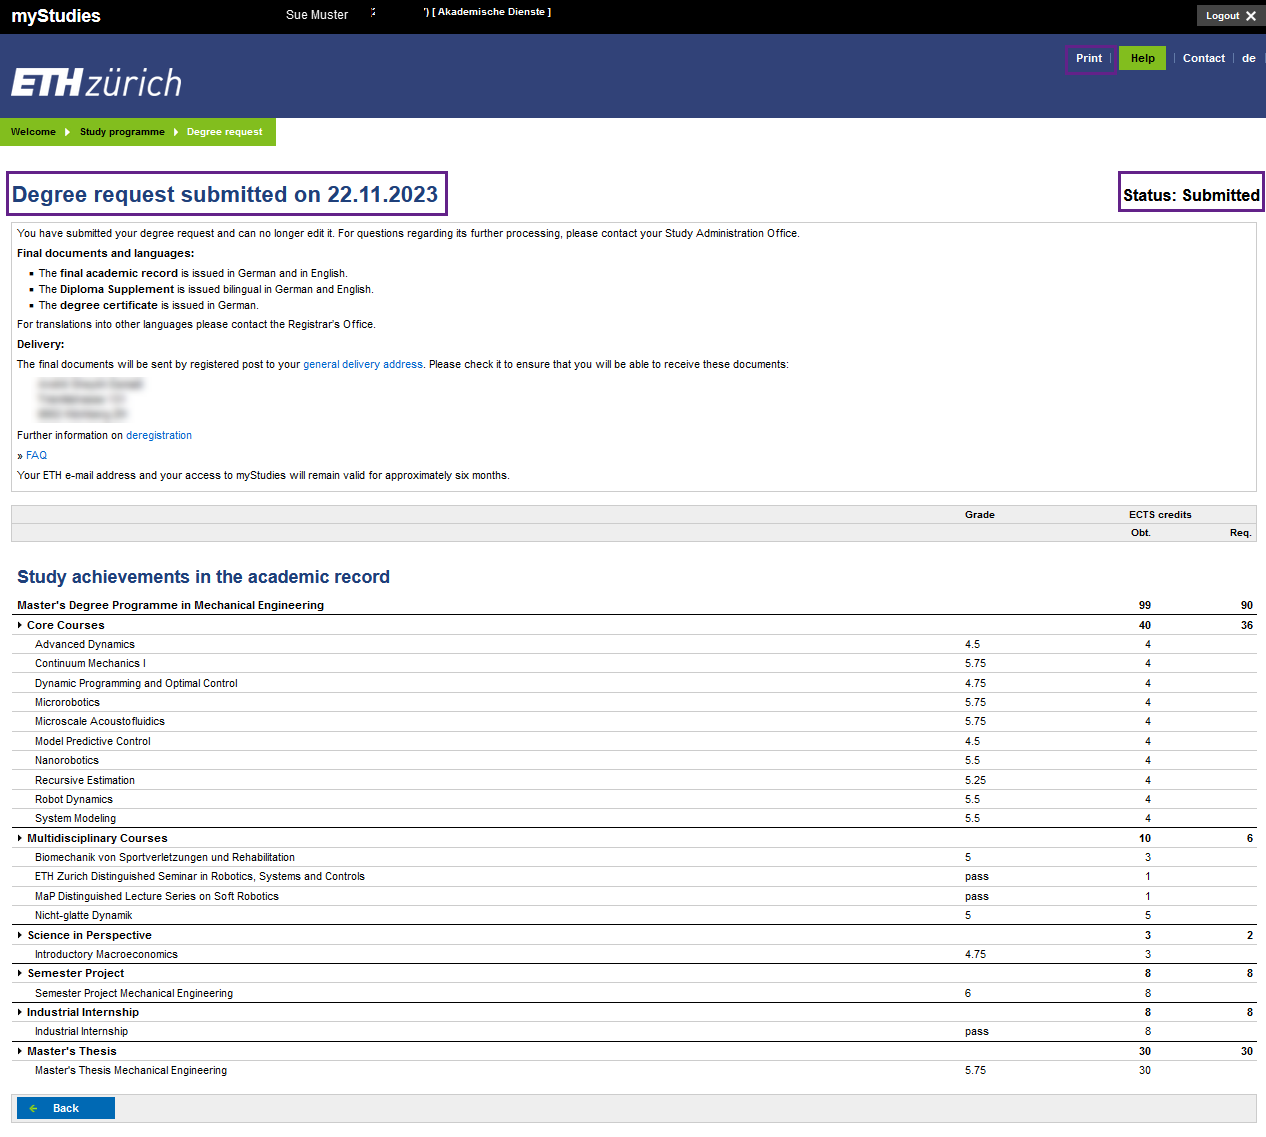 Enlarged view: A screenshot from myStudies is shown. The screenshot shows that the request has already been submitted. The following area is outlined in violet: “Degree request submitted on 22.11.2023”, “Status: Submitted” and “Print”.